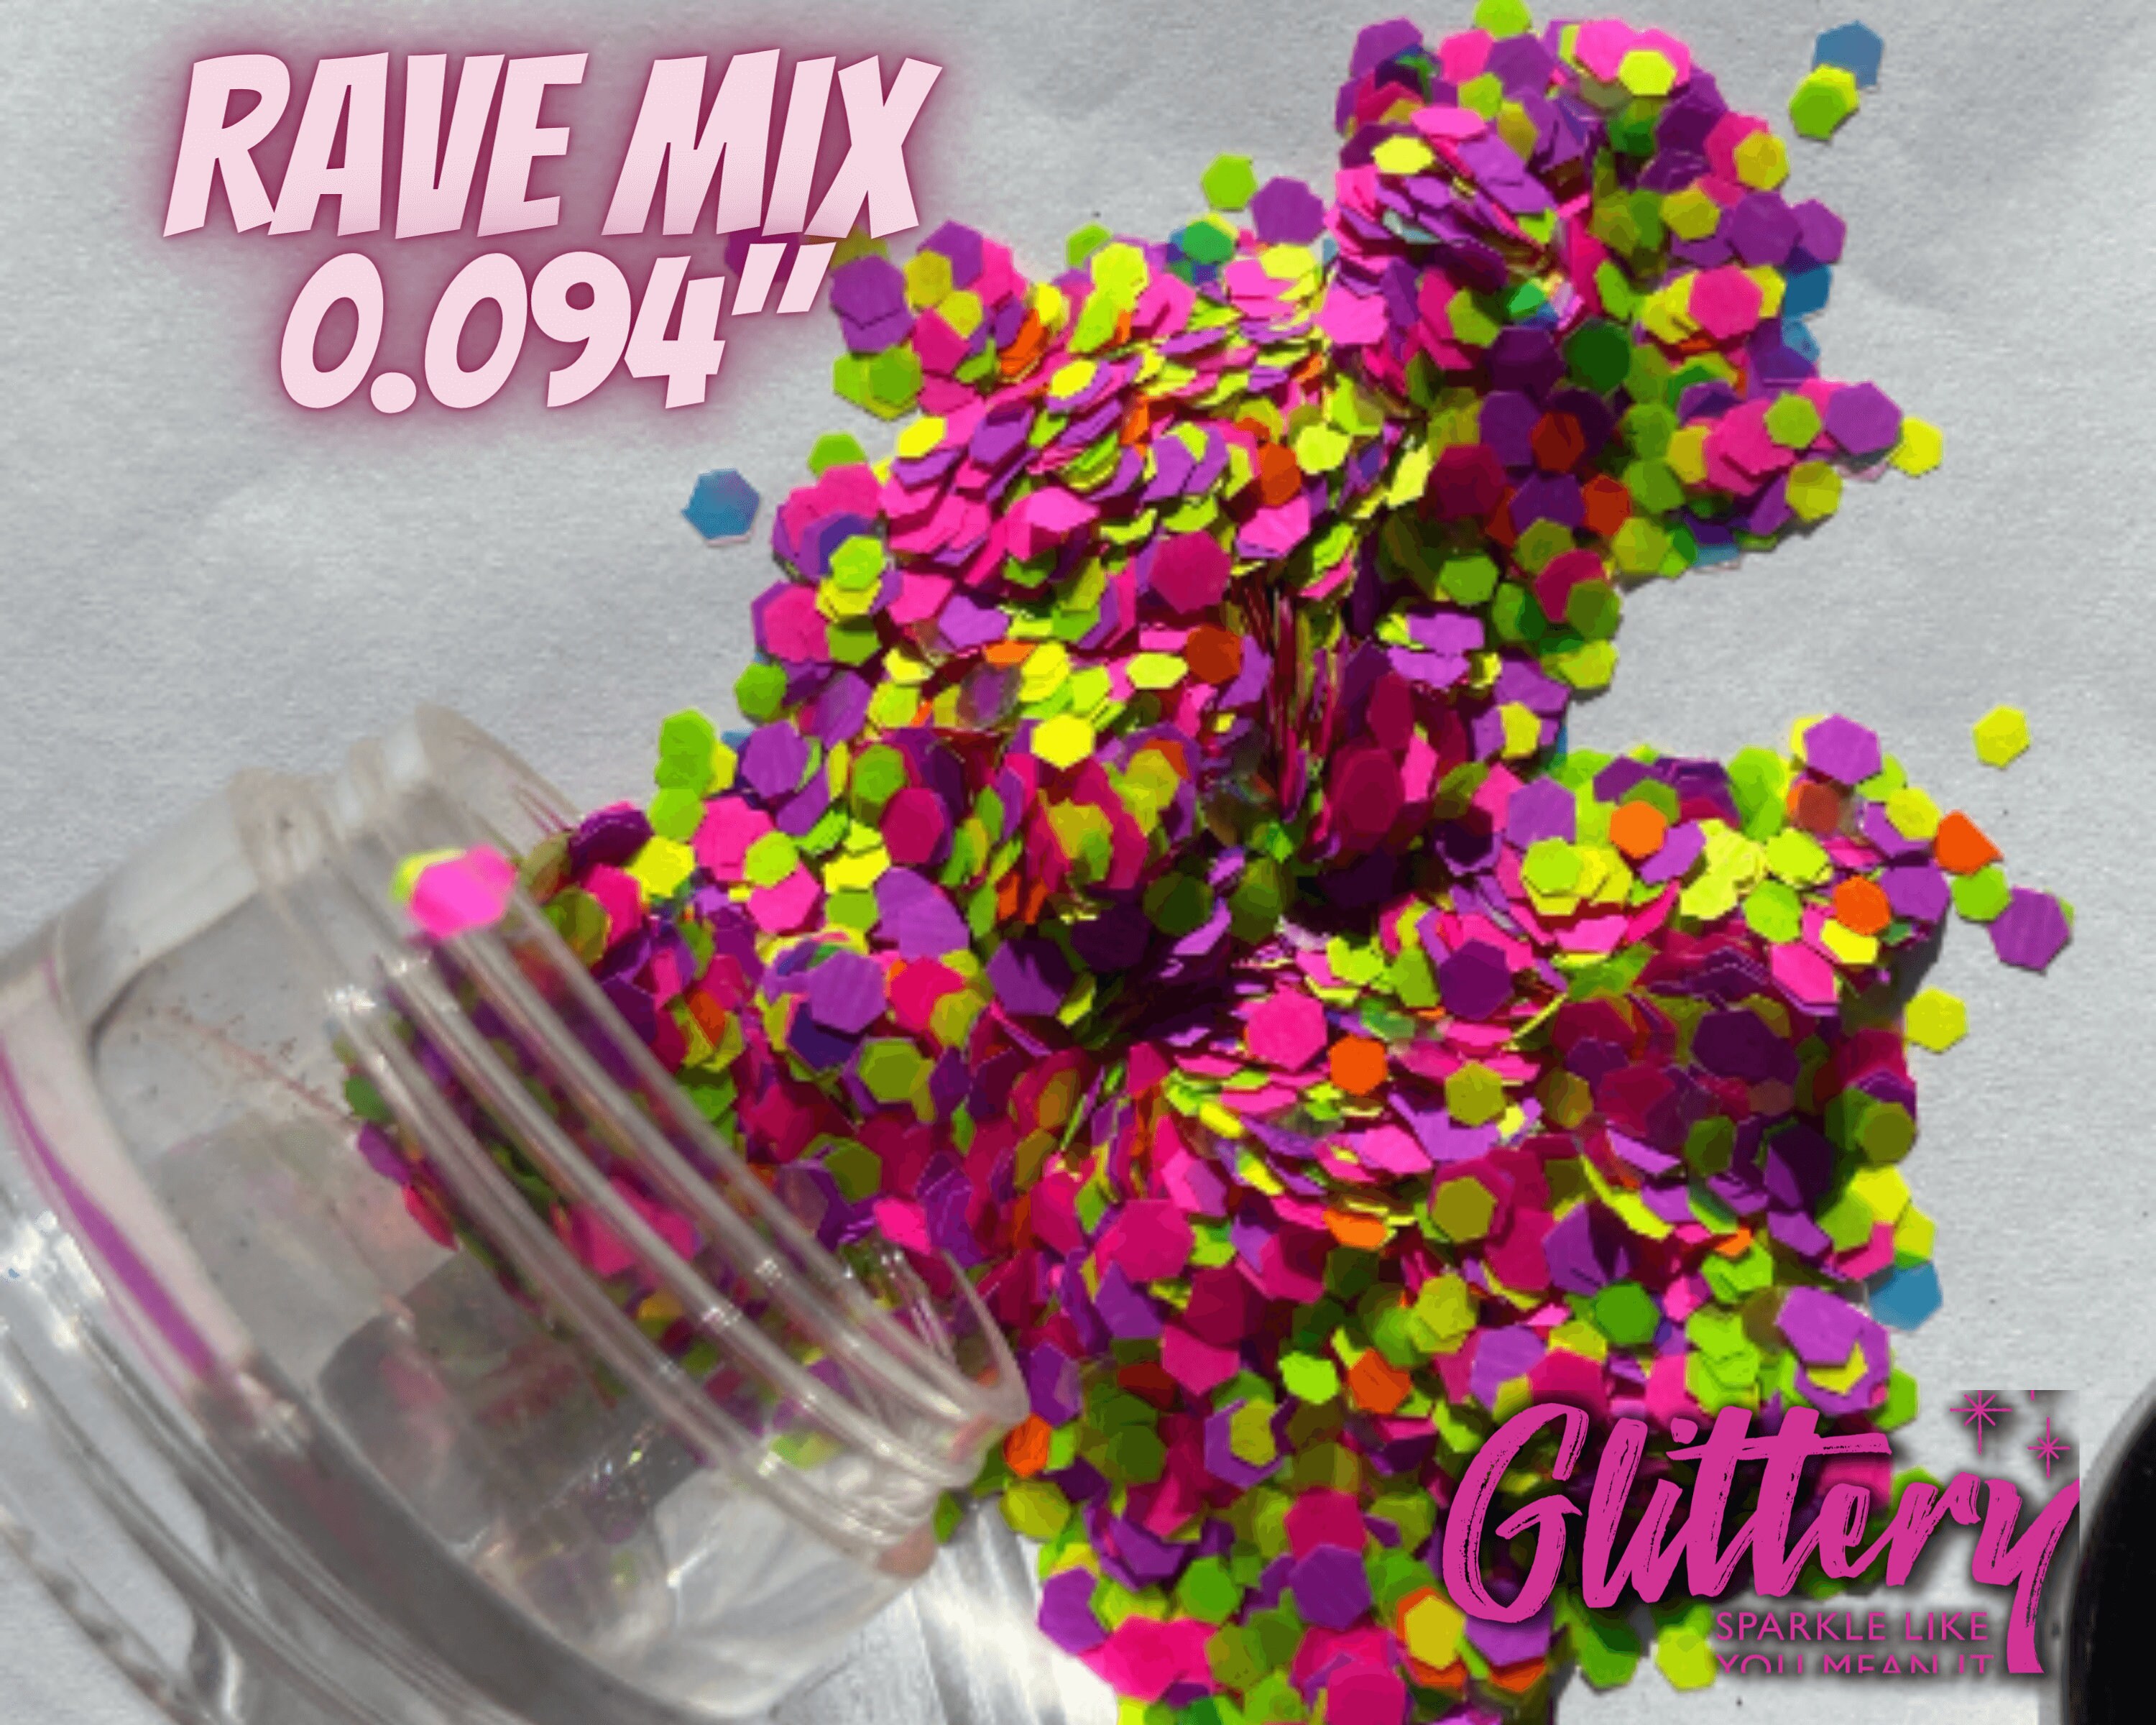 At Atticus luge Pink Rave Mix Chunky Glitter UV Reactive Glitter Mix - Etsy